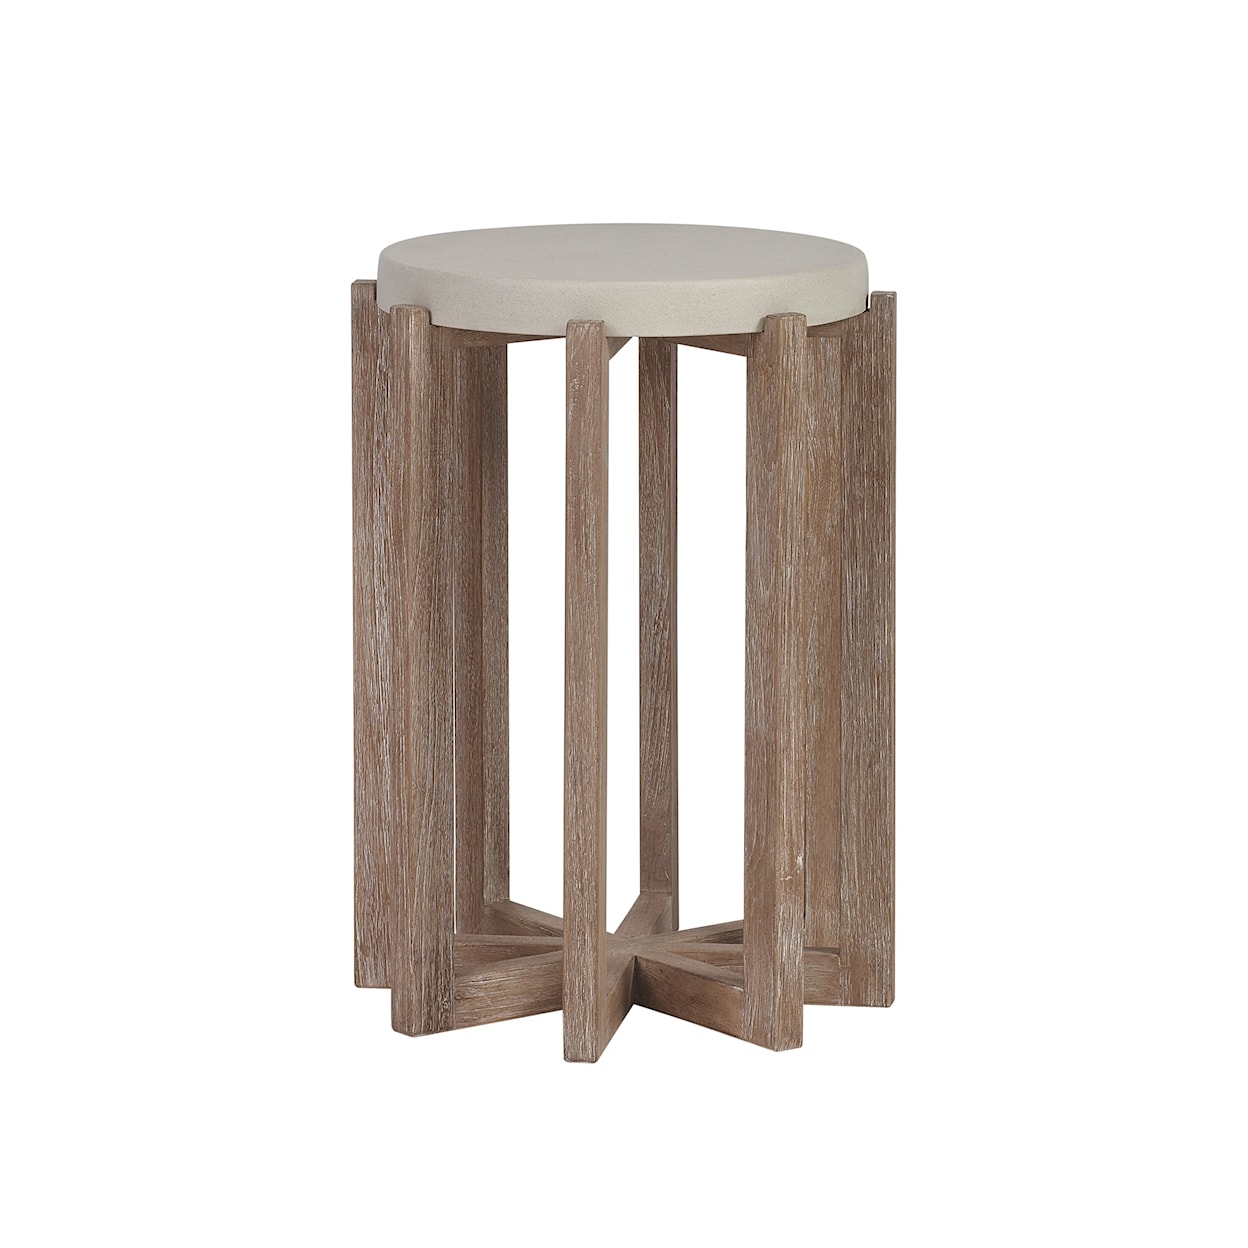 Tommy Bahama Outdoor Living Stillwater Cove Accent Table